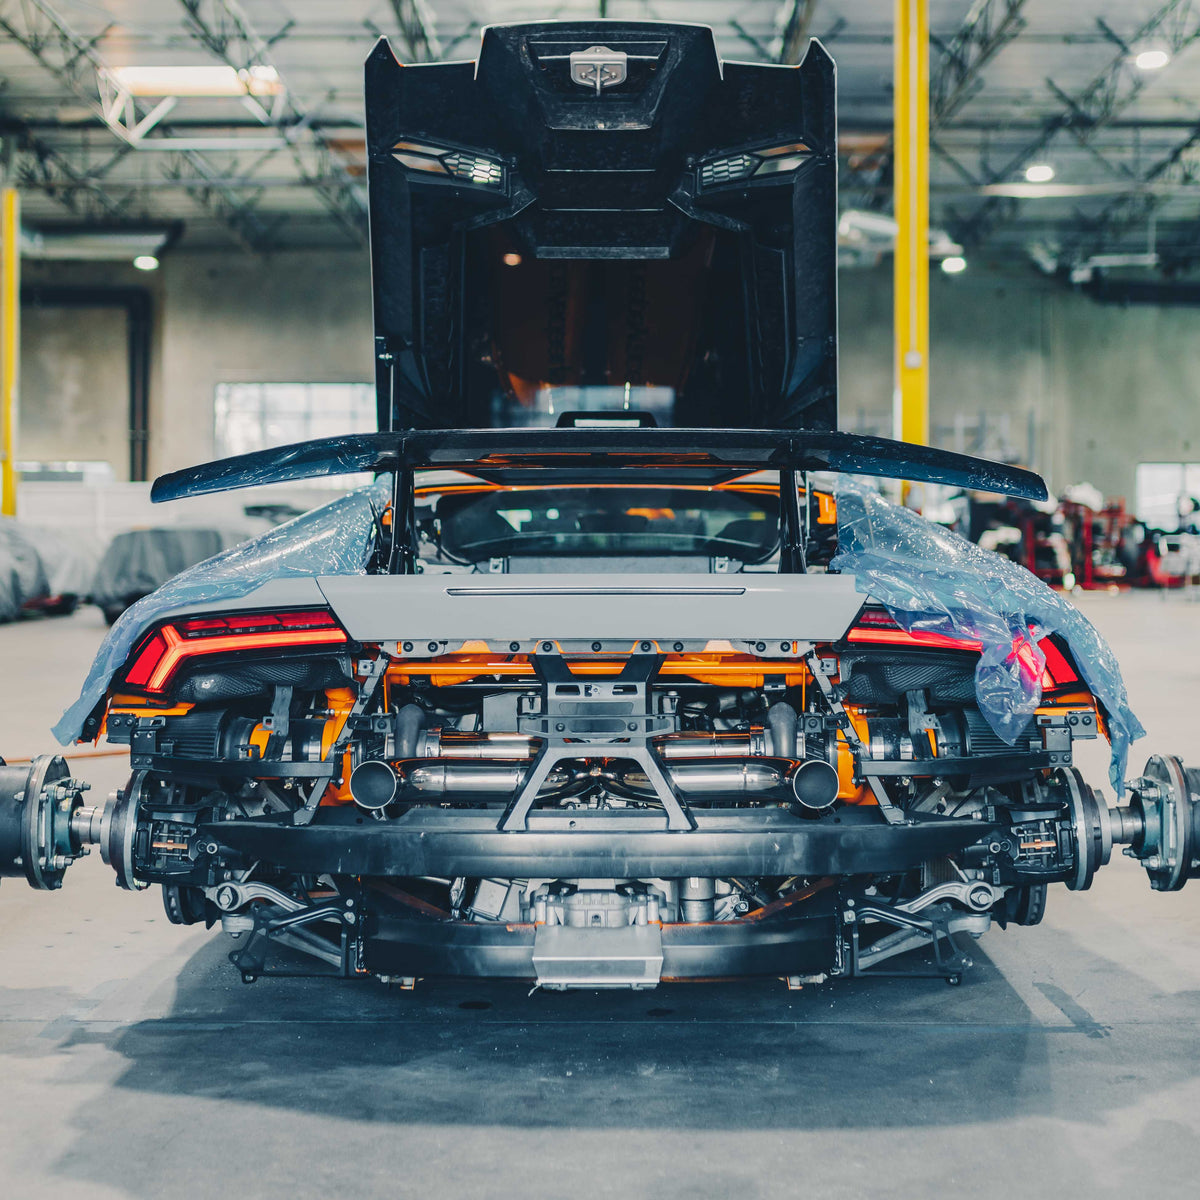 1,400HP Sheepey Race Twin-Turbo 2017 Audi R8 V10 Plus For Sale